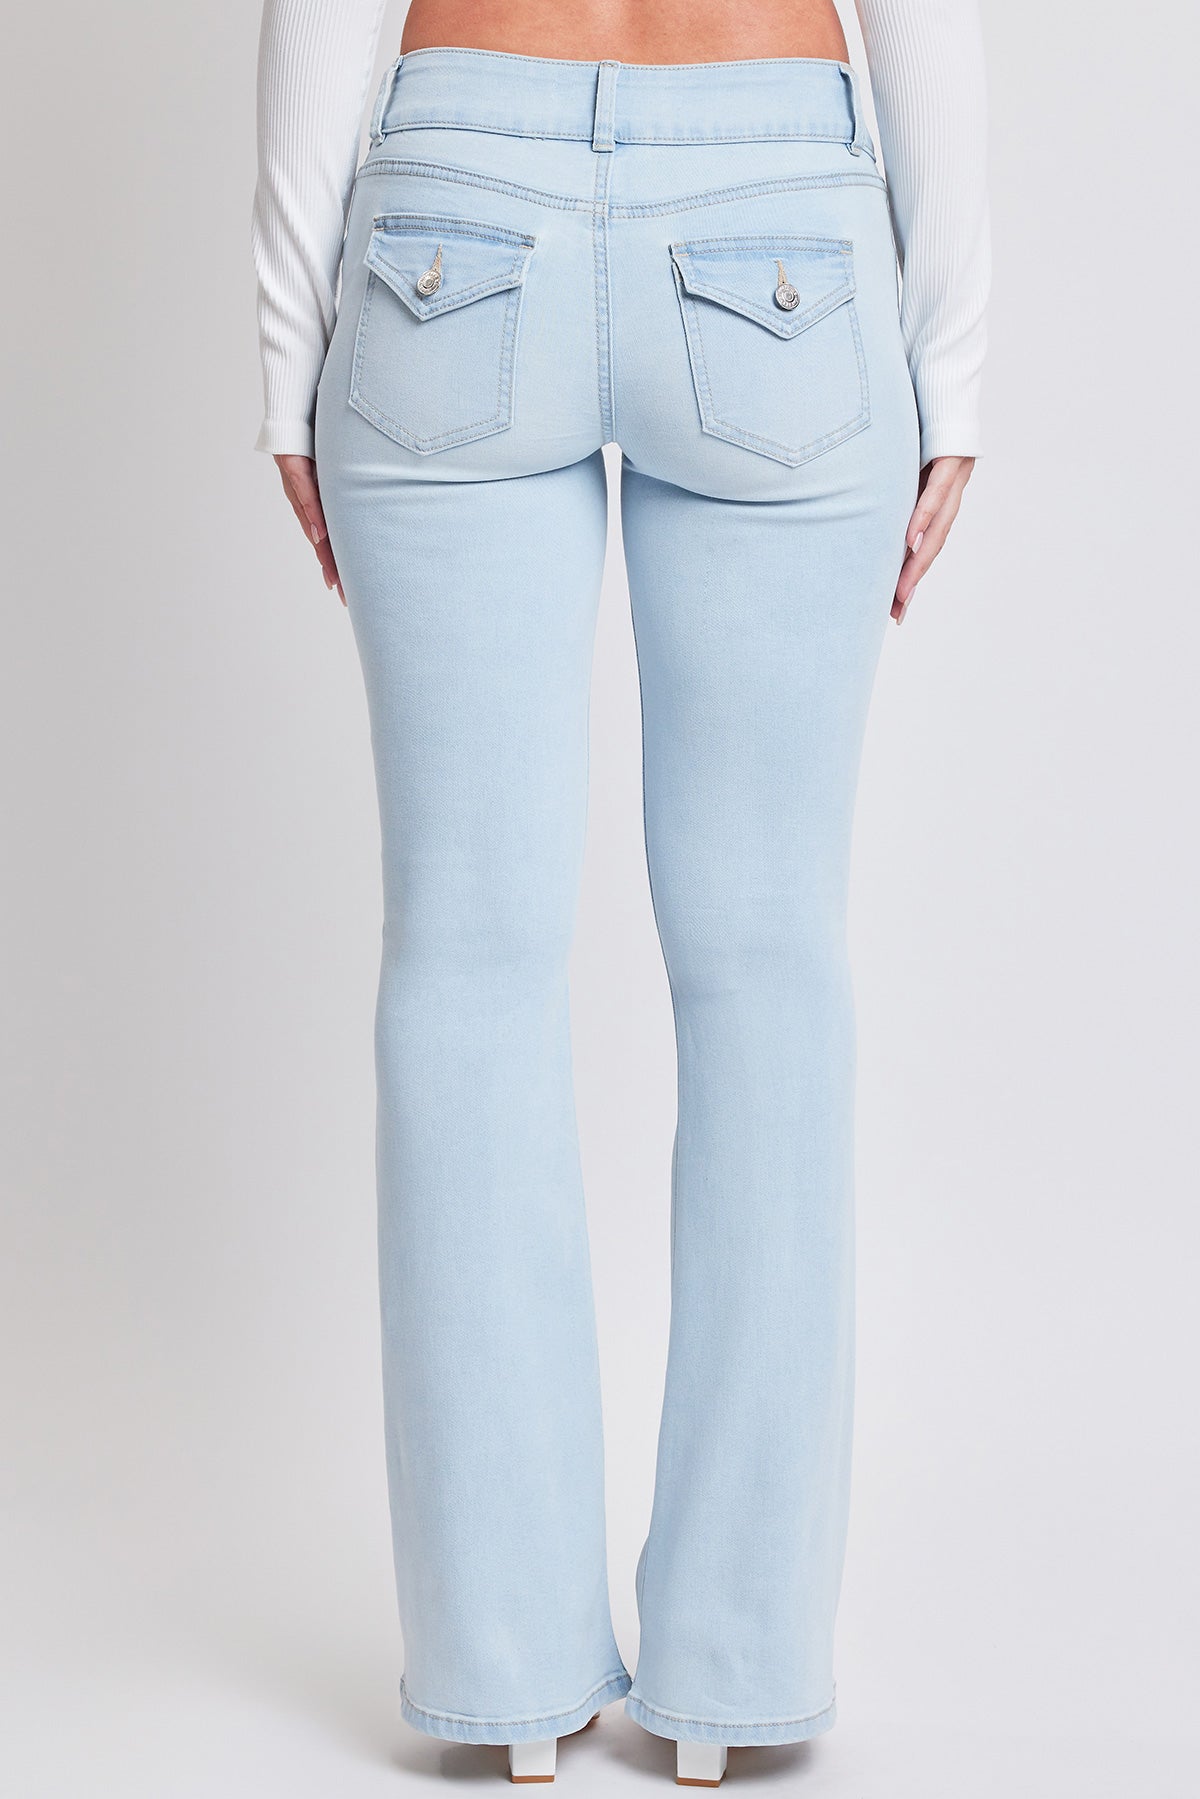 Women's Flare Featuring Flap Back Pocket Jeans